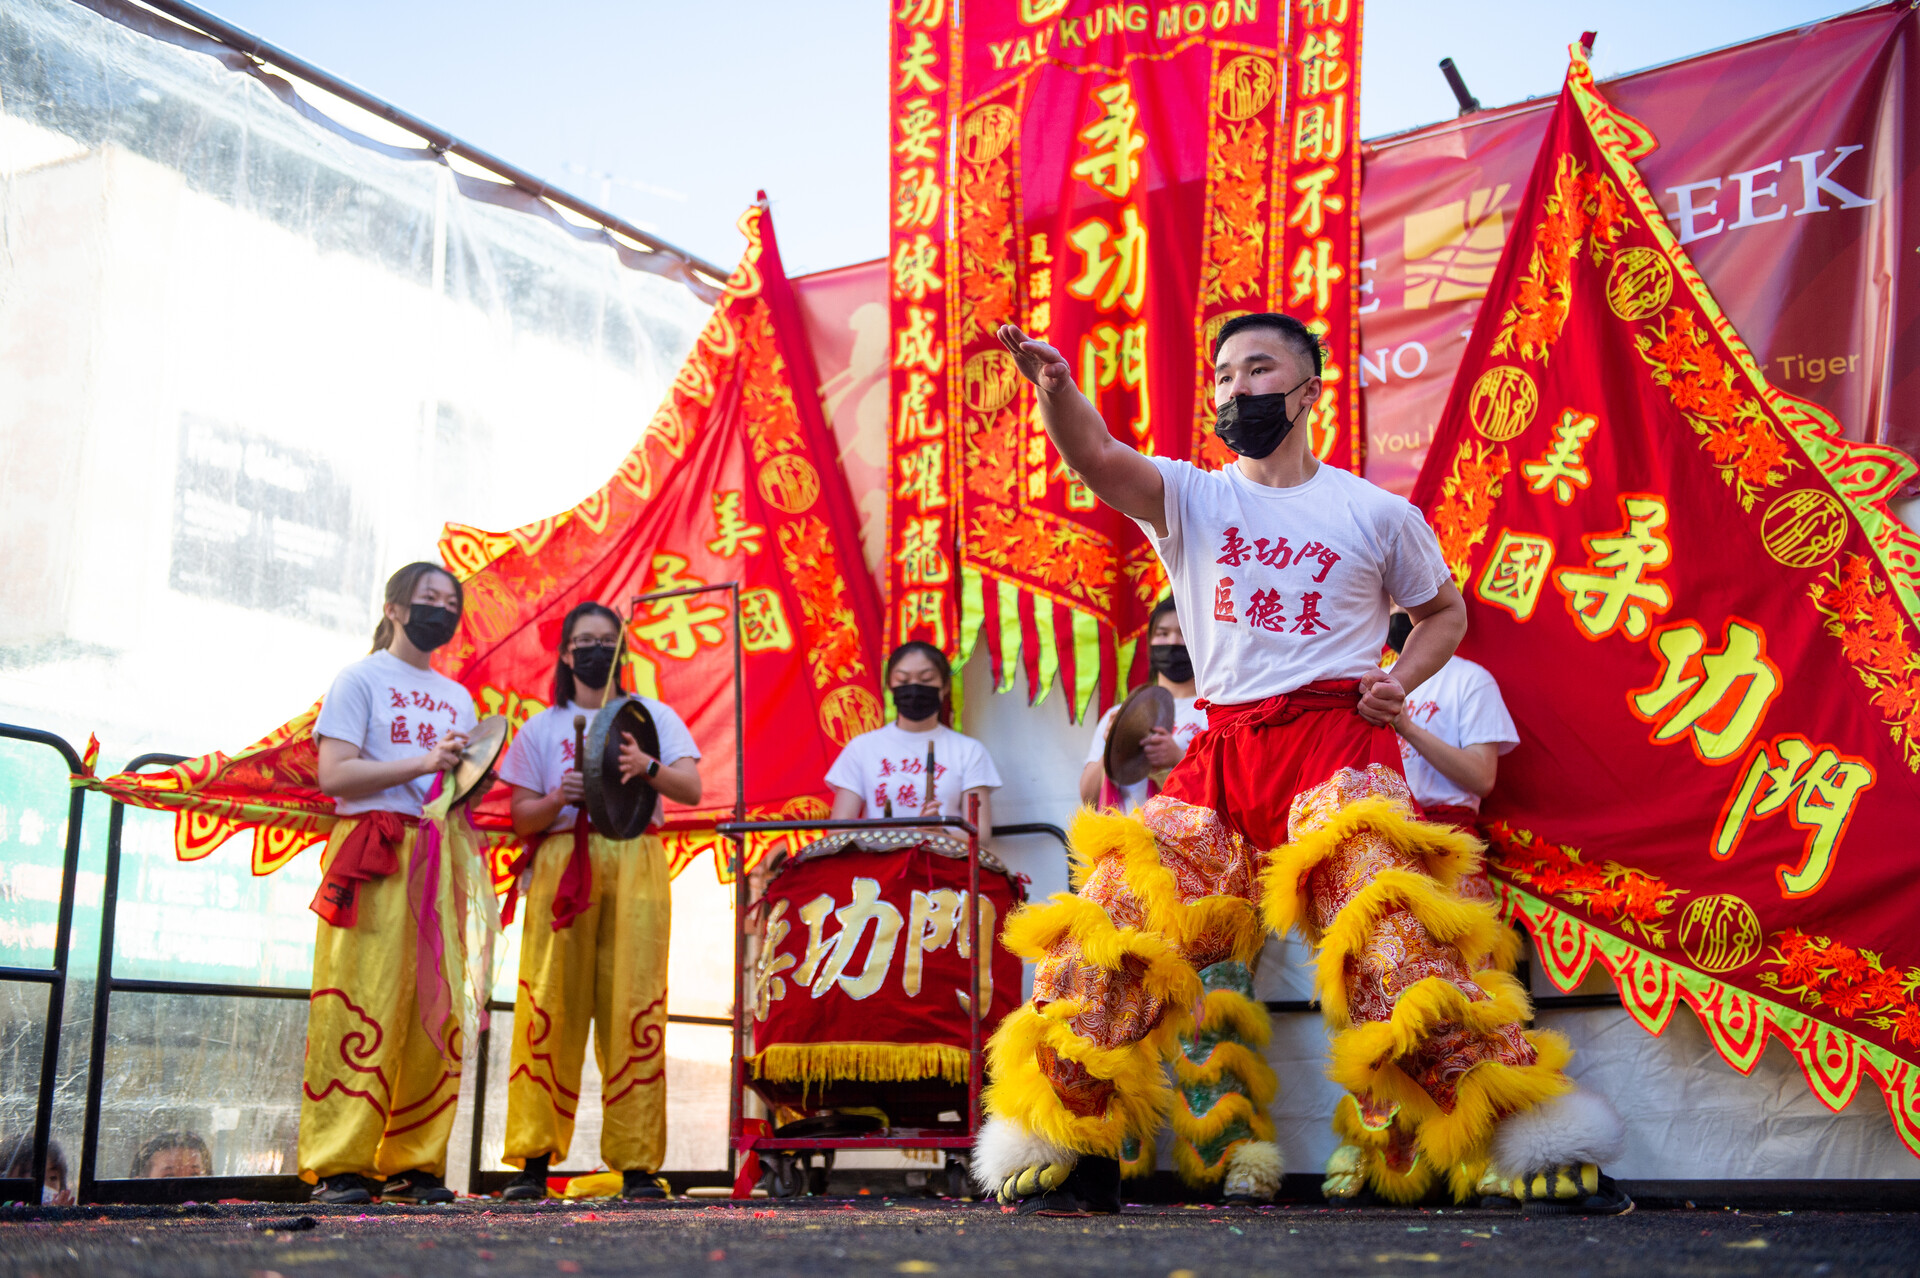 man wearing white and red shirt, traditional bright yellow and red leggings, performs a kung fu form on an outdoor stage